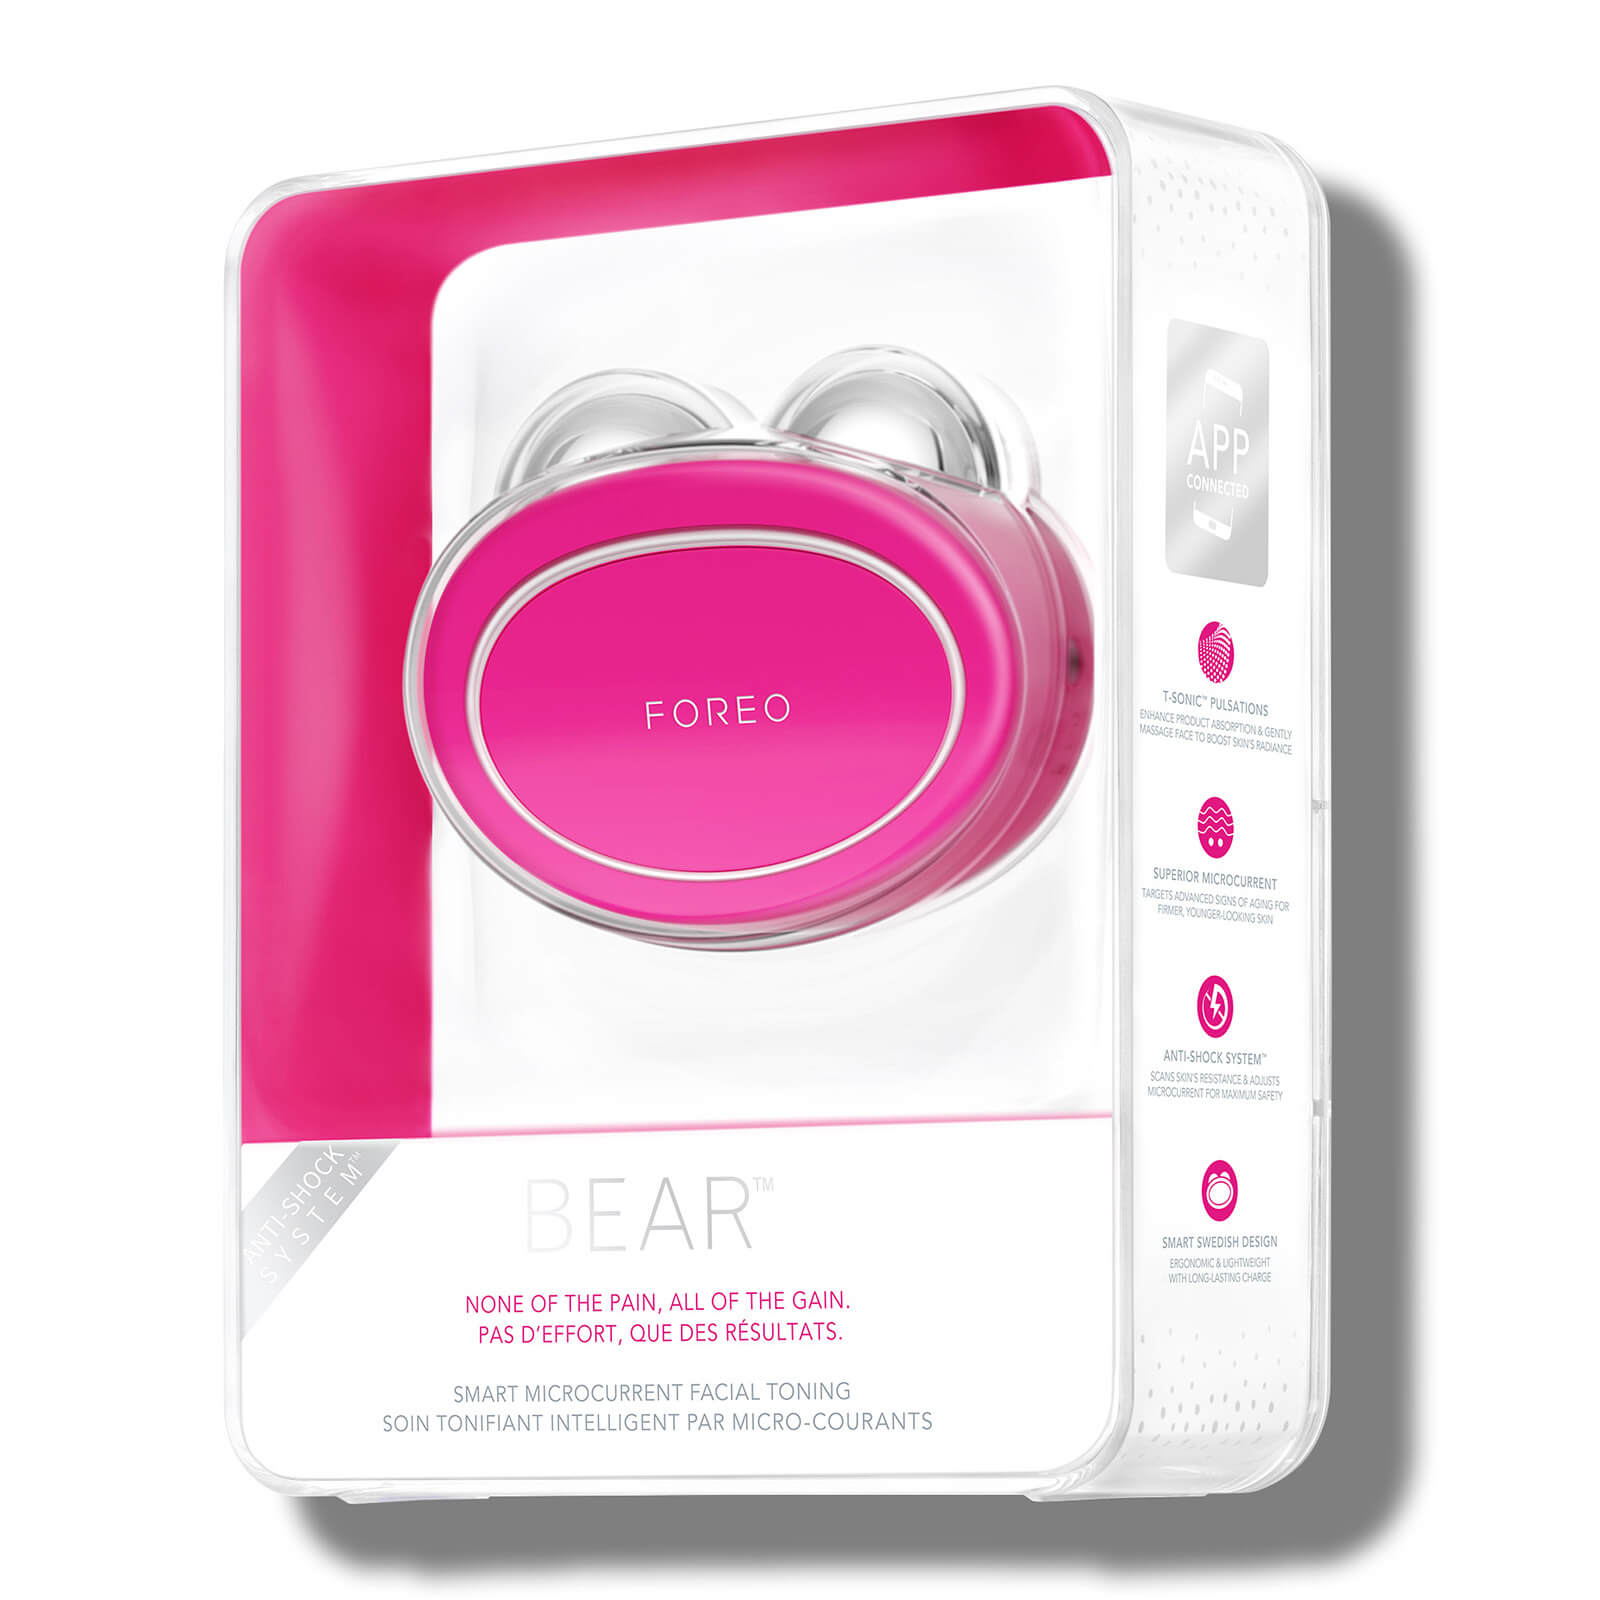 FOREO Bear Microcurrent Facial Toning Device With 5 Intensities (Various Shades) - Fuchsia